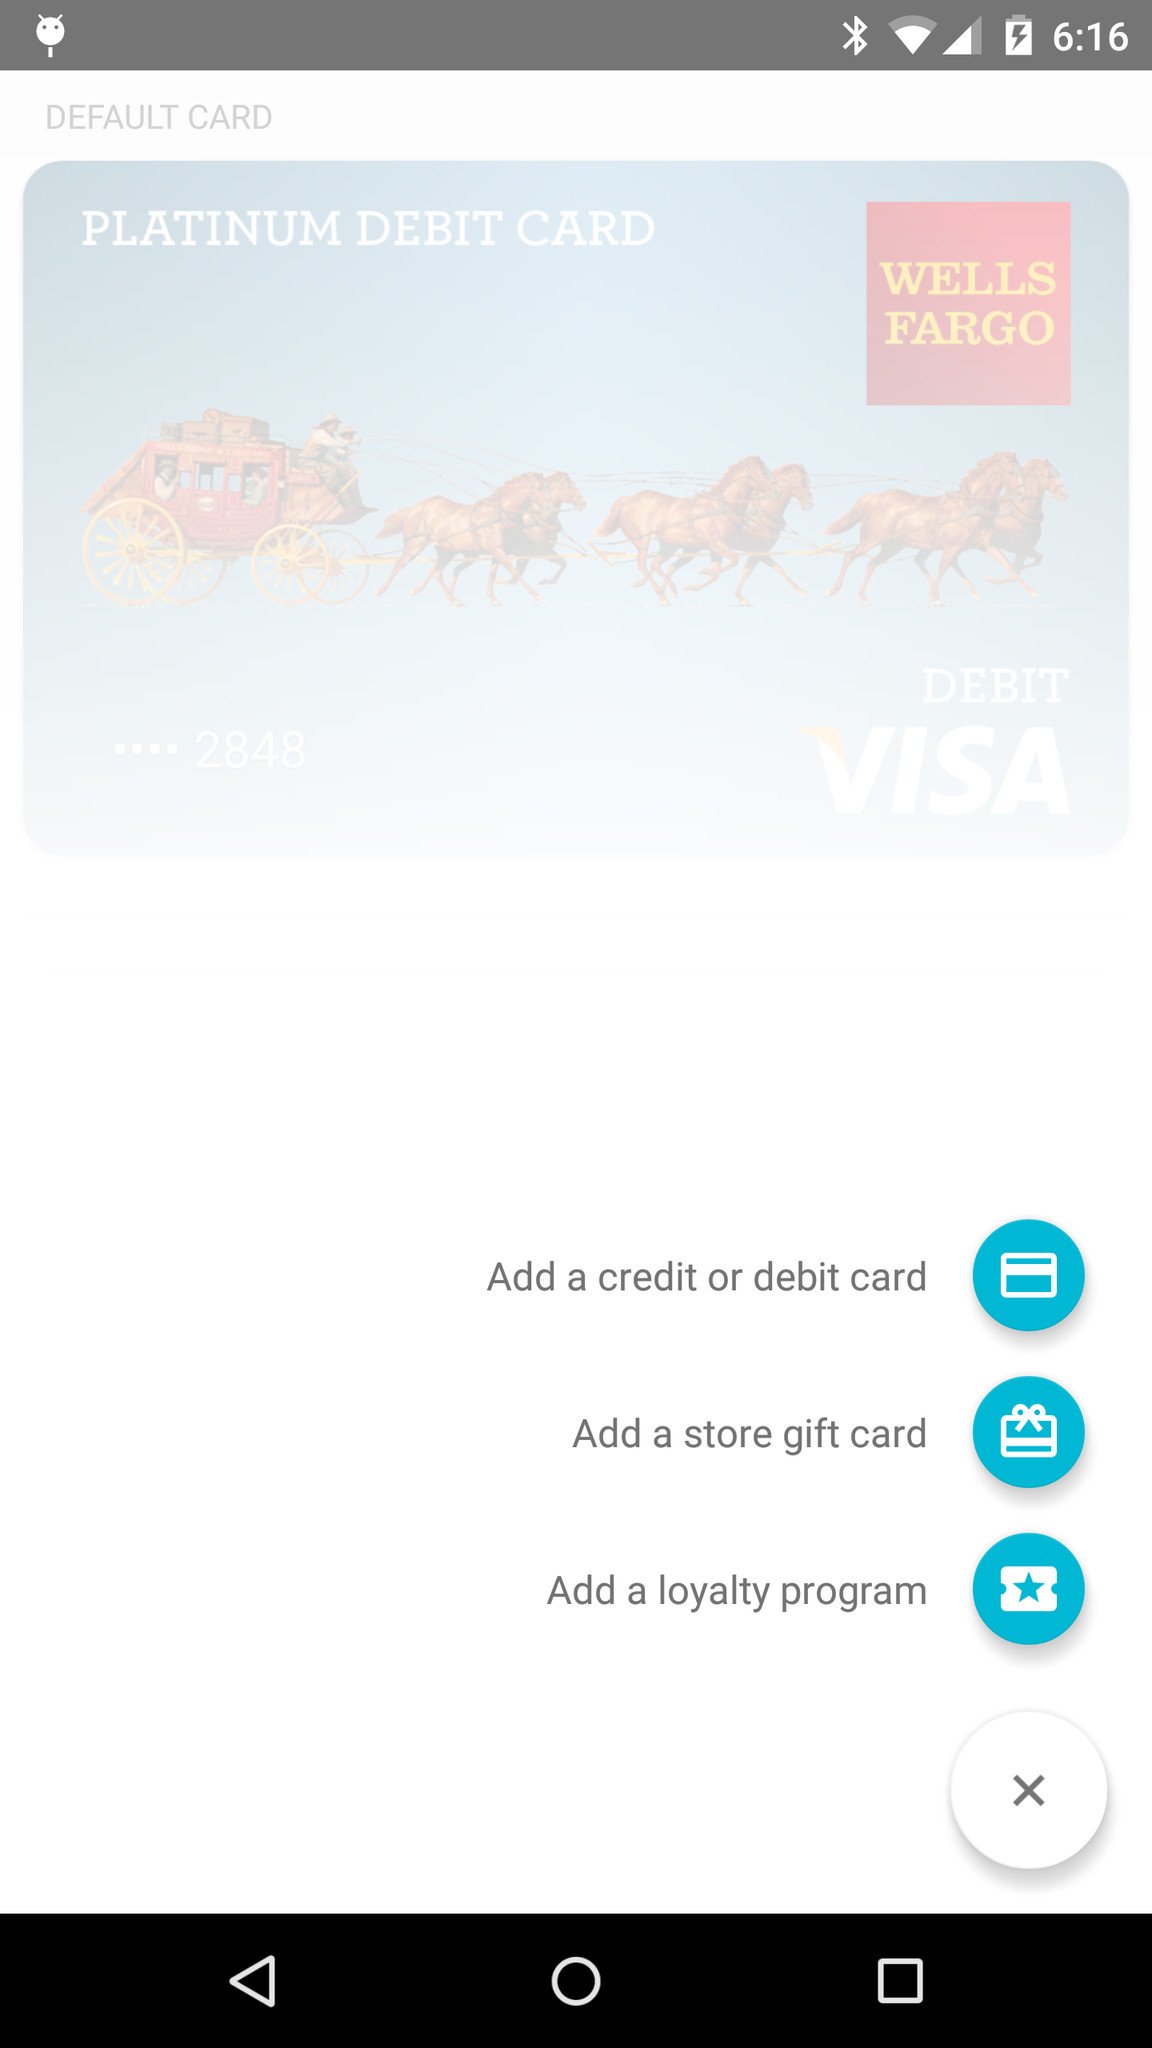 Click on Add Credit or Debit card button